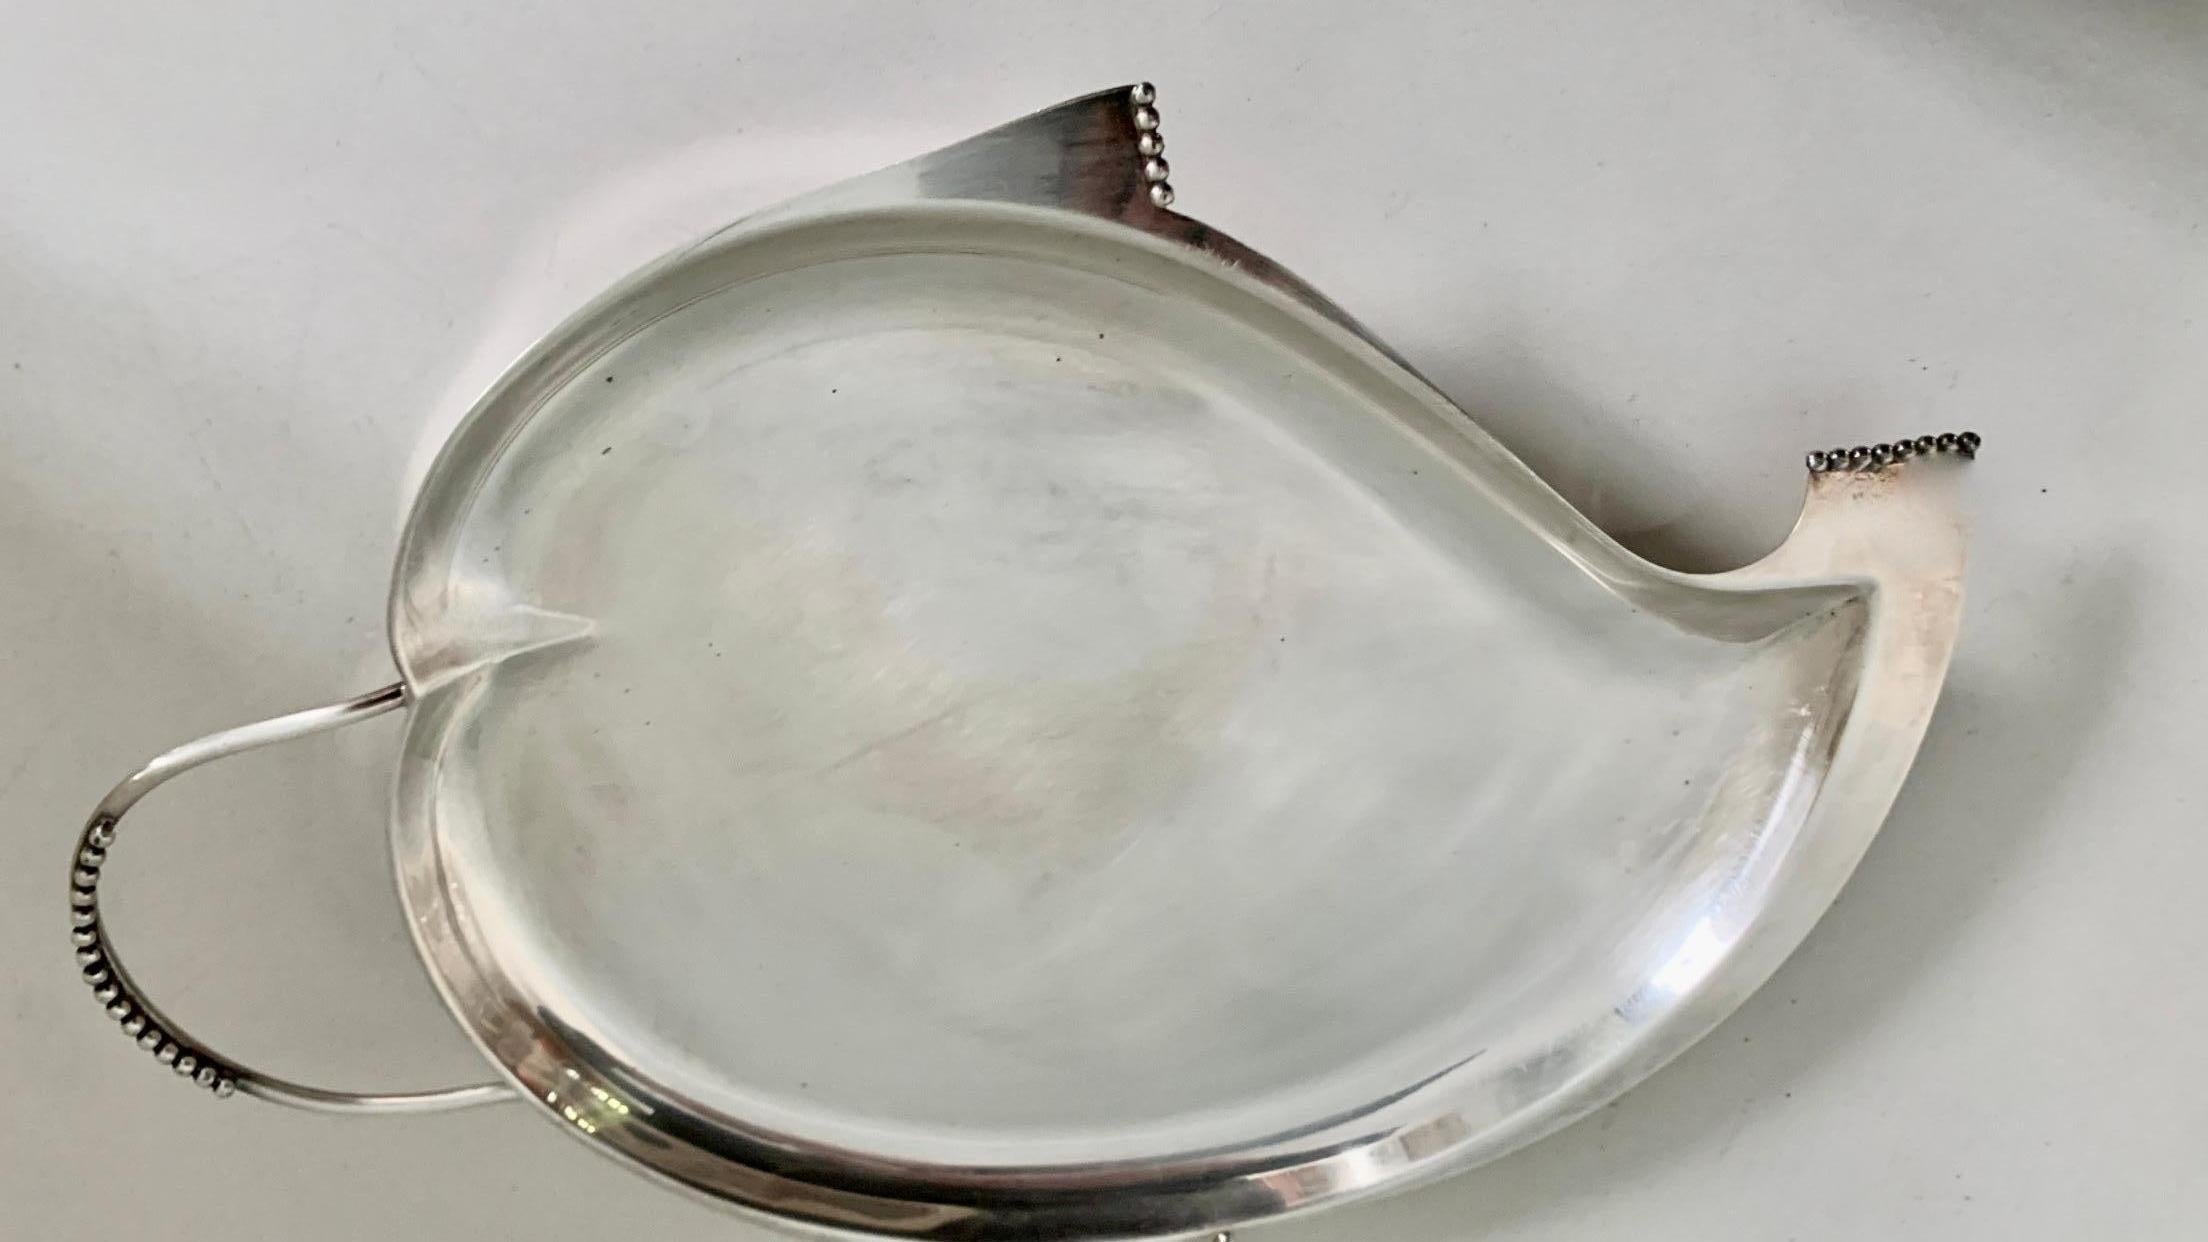 A very unique silver plate serving tray with influences of both Elsa Peretti and George Jensen. The amoeba like, organic shape with flared beaded edging gives a true sense of sophistication. From the bar to the cocktail table, a compliment to any